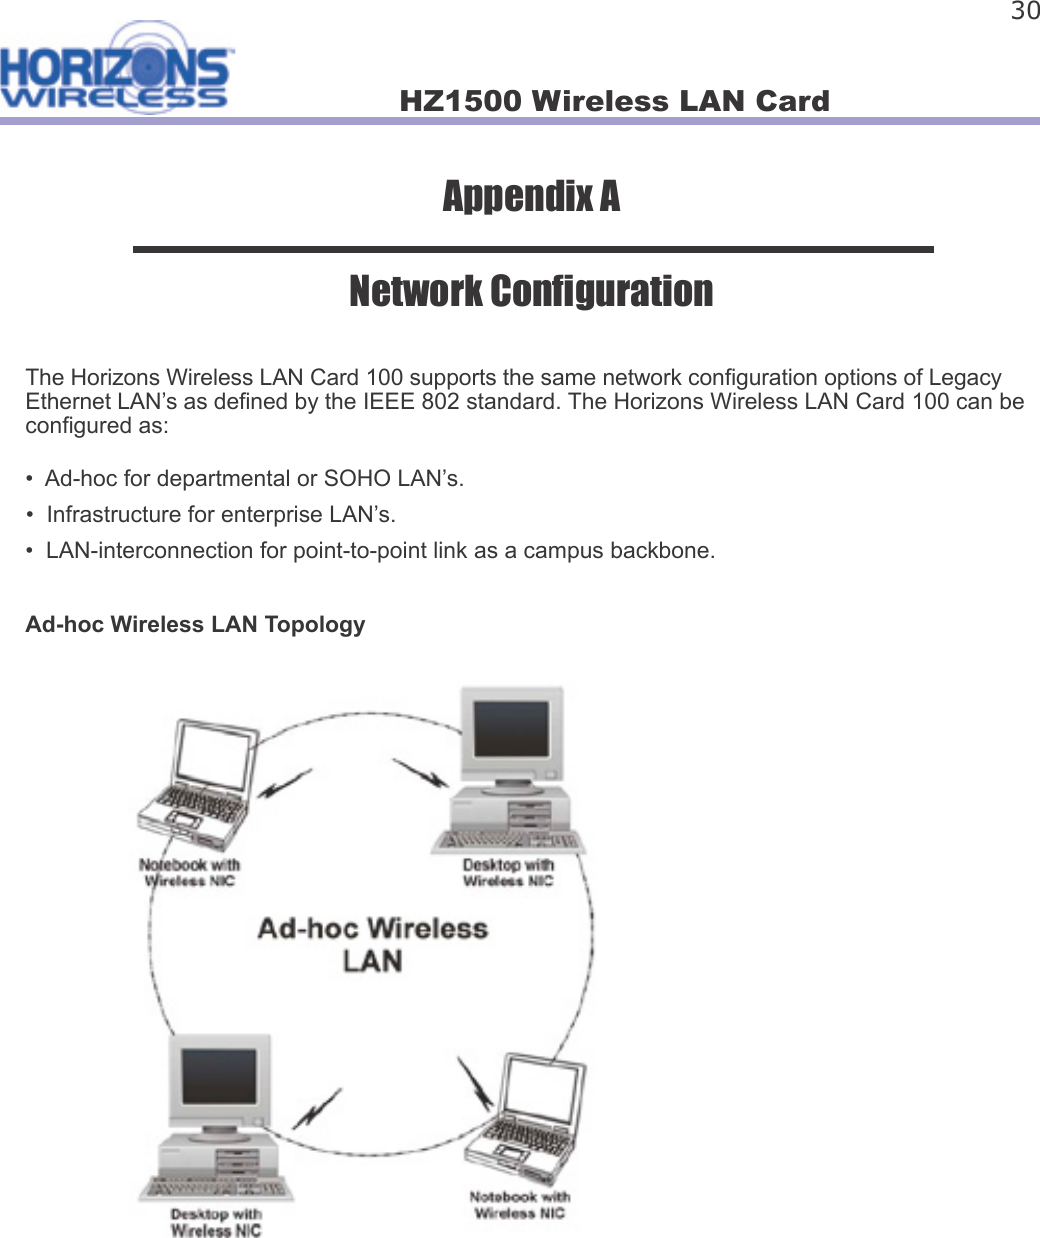 HZ1500 Wireless LAN Card 30Appendix ANetwork Con gurationThe Horizons Wireless LAN Card 100 supports the same network con guration options of Legacy Ethernet LAN’s as de ned by the IEEE 802 standard. The Horizons Wireless LAN Card 100 can be con gured as:•  Ad-hoc for departmental or SOHO LAN’s.•  Infrastructure for enterprise LAN’s.•  LAN-interconnection for point-to-point link as a campus backbone.Ad-hoc Wireless LAN Topology